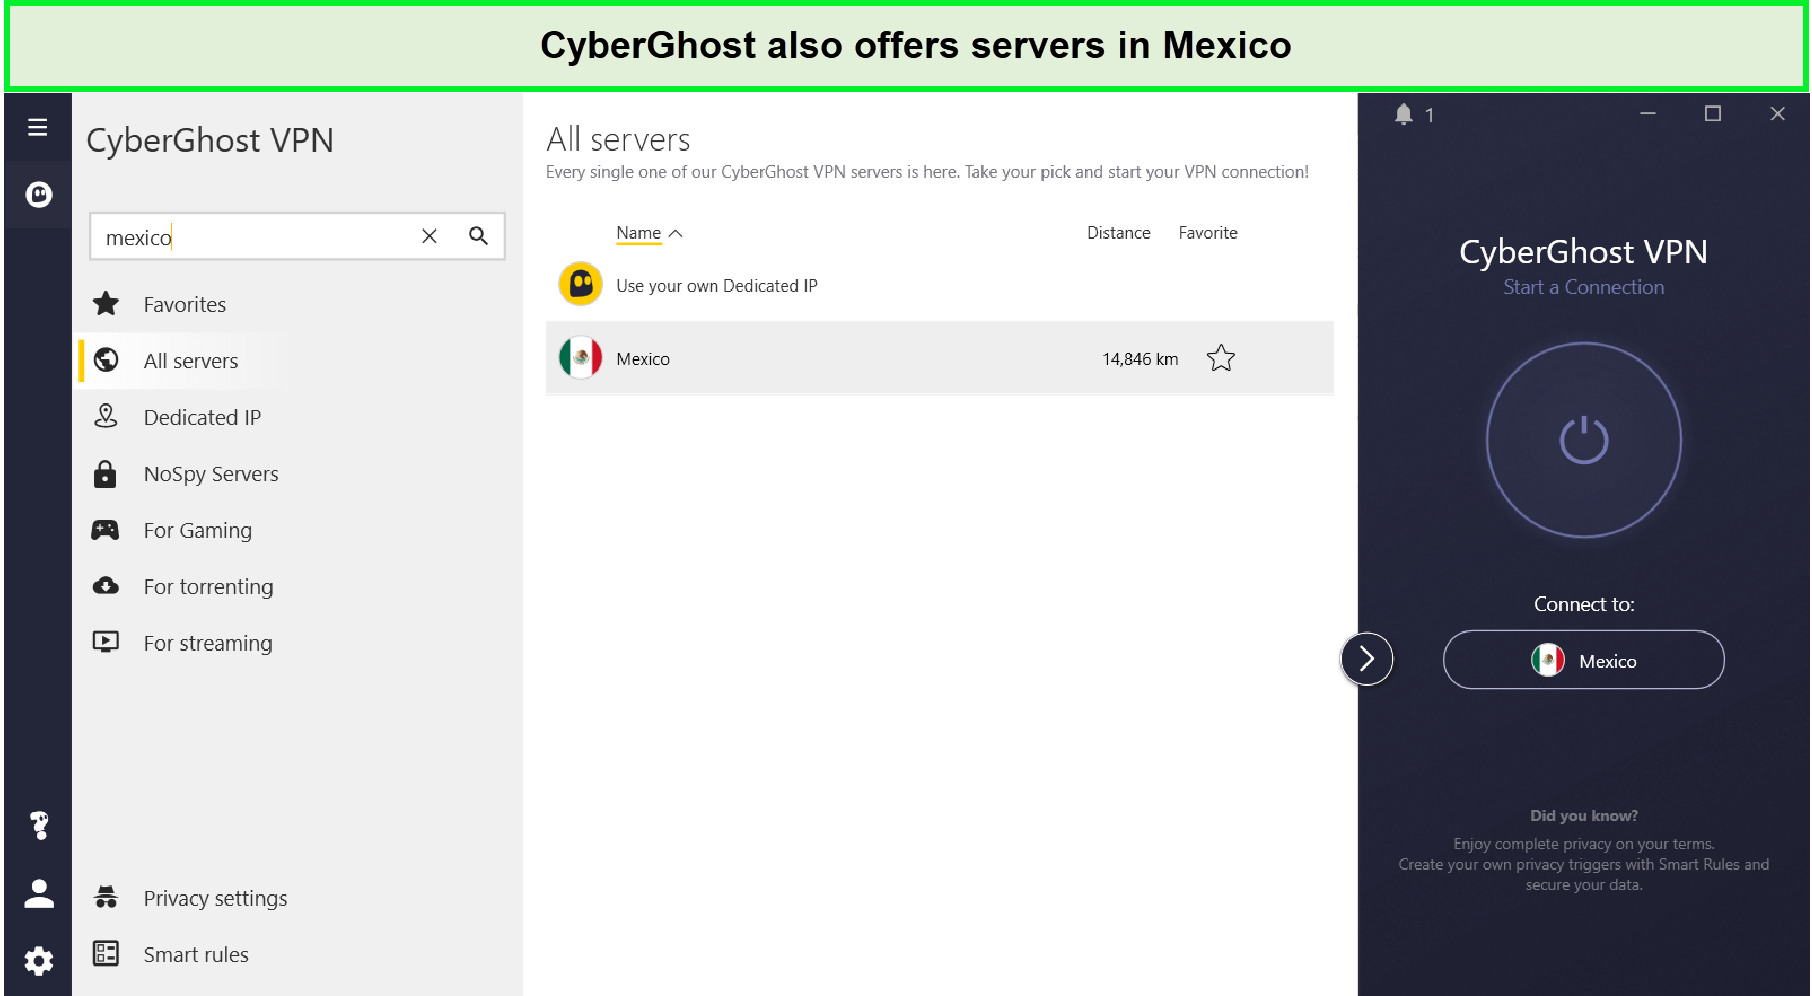 cyberghost-vpn-mexico-servers-For Hong Kong Users